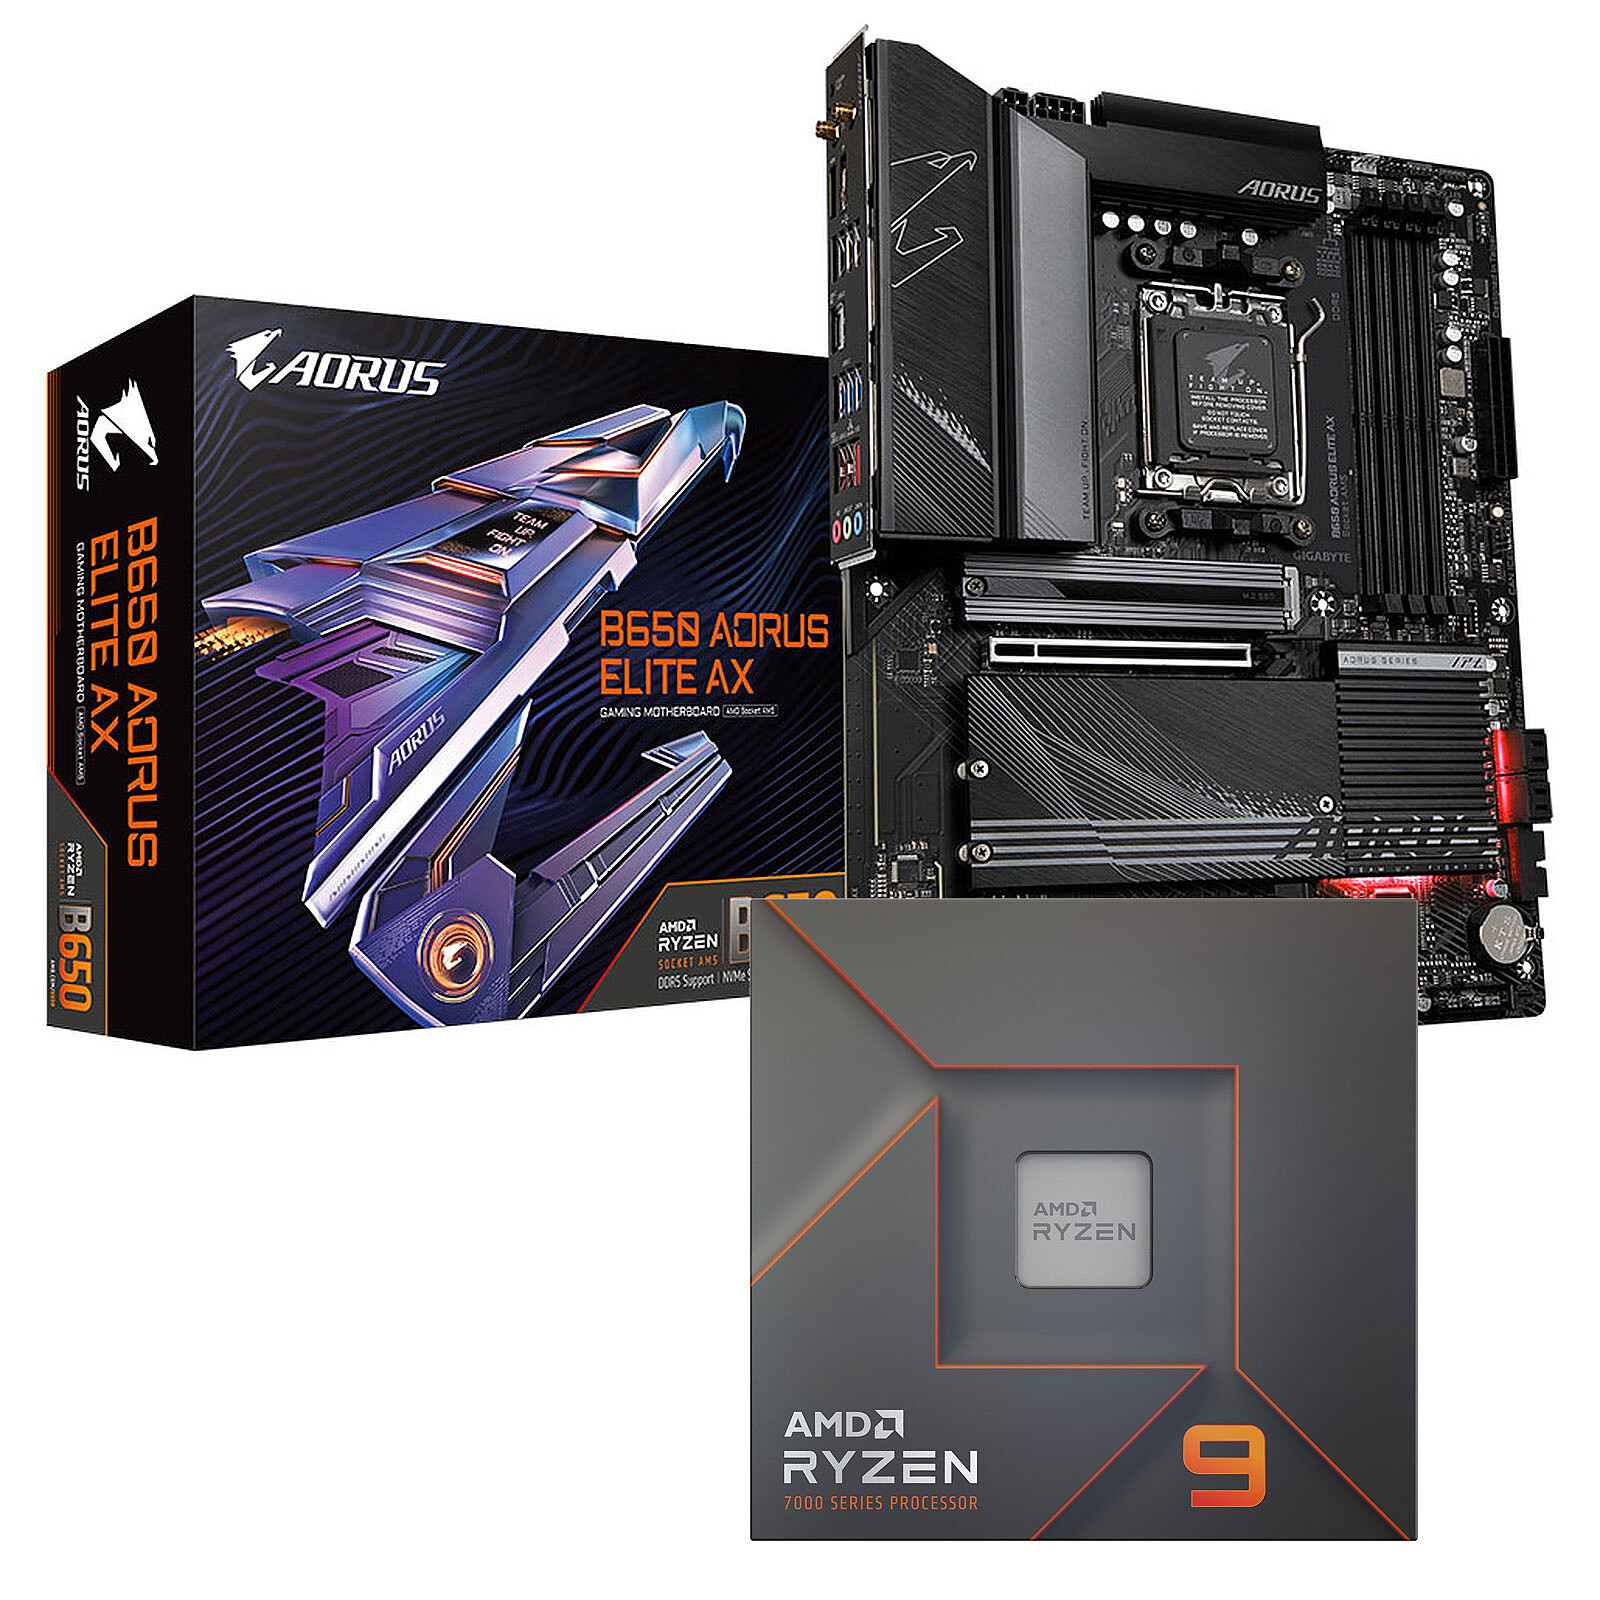 AMD Ryzen 9 7950X & 7900X CPU Gaming Performance Can Improve By